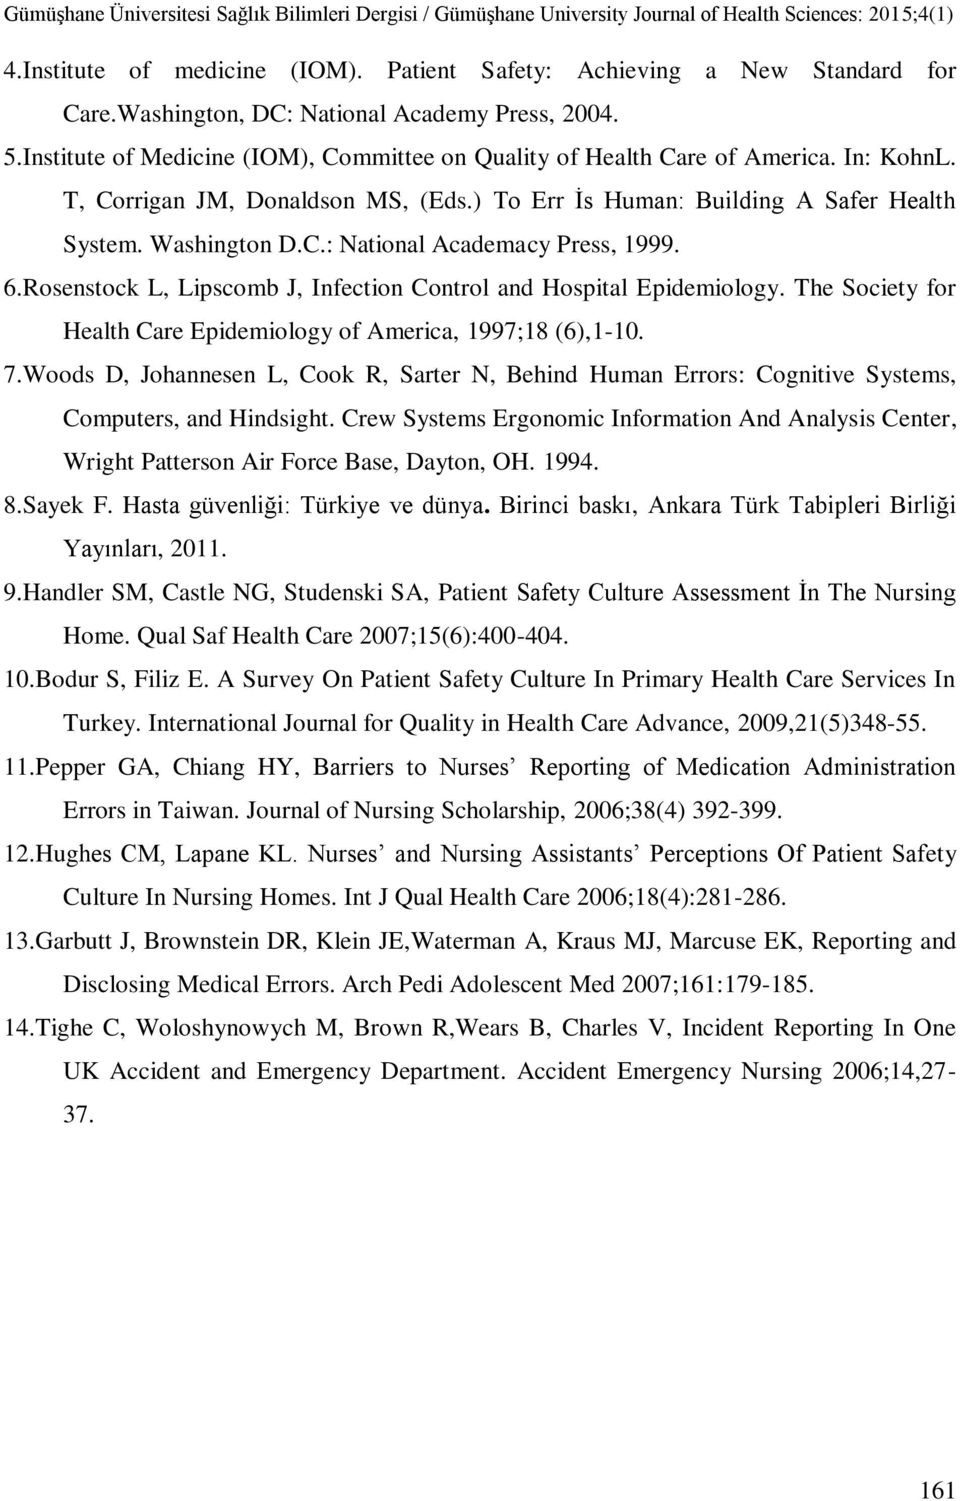 6.Rosenstock L, Lipscomb J, Infection Control and Hospital Epidemiology. The Society for Health Care Epidemiology of America, 1997;18 (6),1-10. 7.